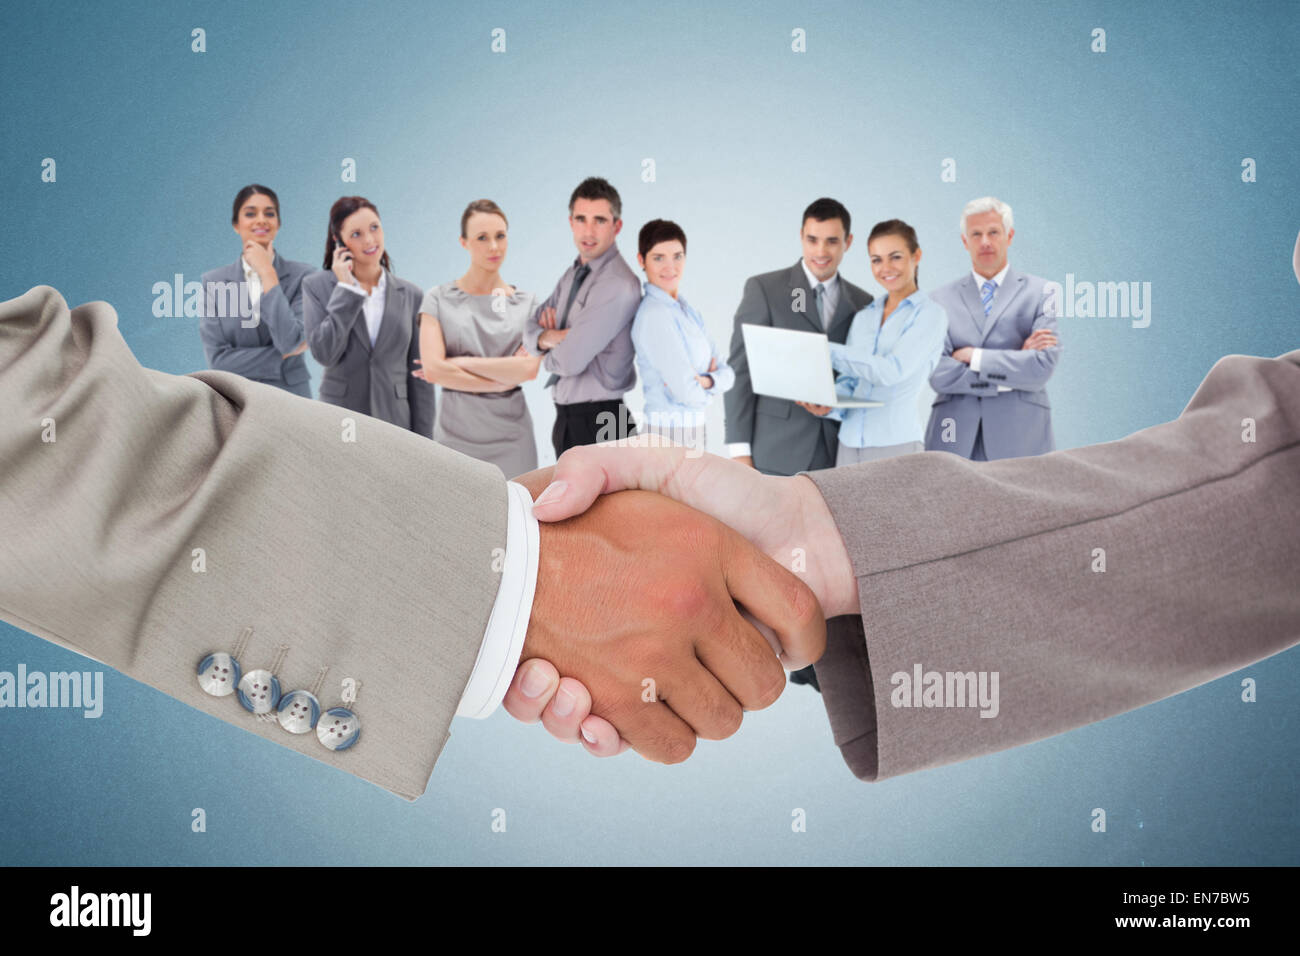 Composite image of side view of shaking hands Stock Photo